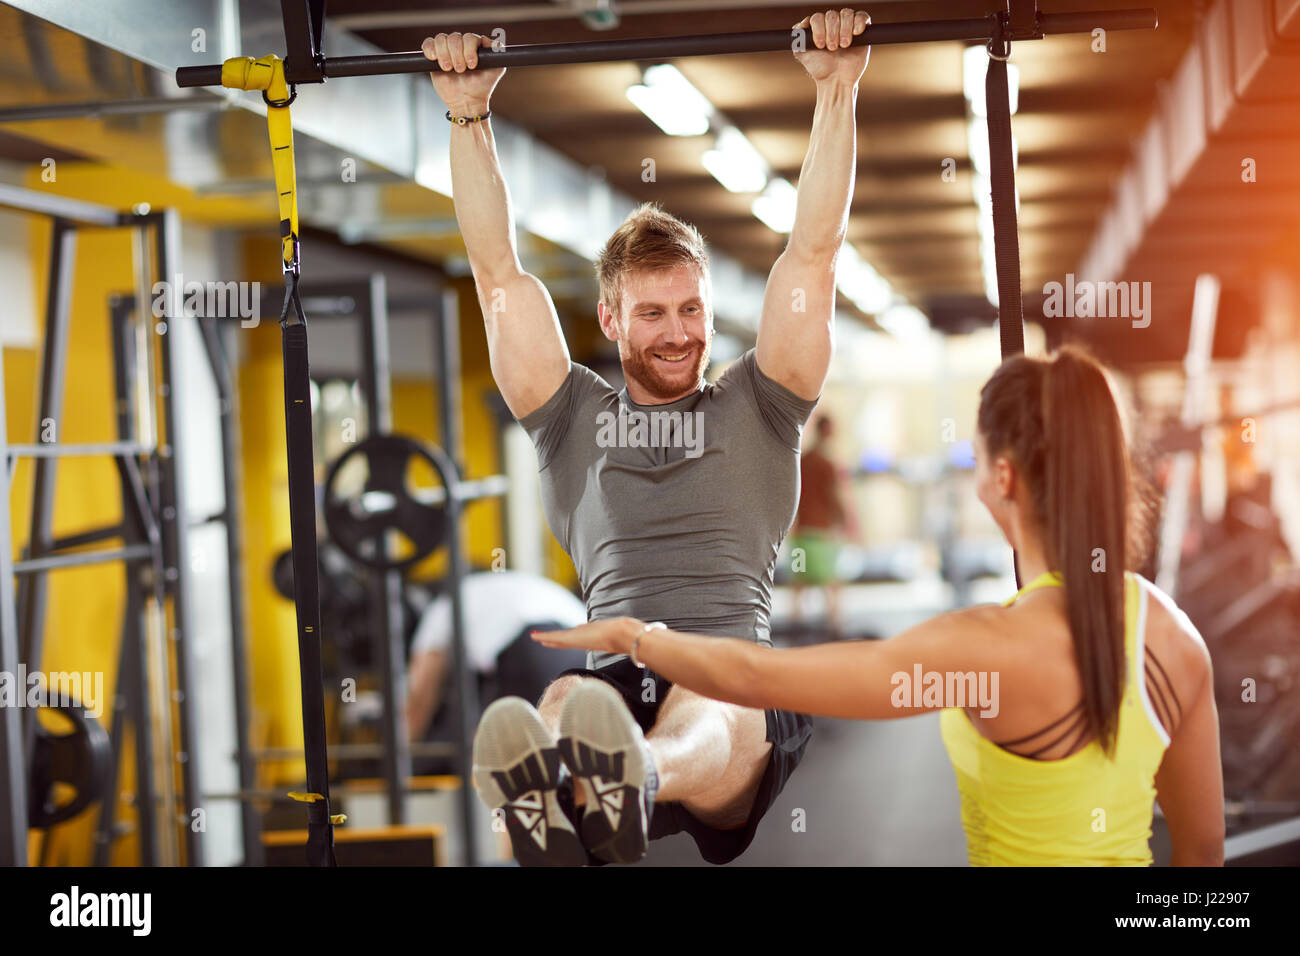 Female and male compete in endurance on fitness training Stock Photo